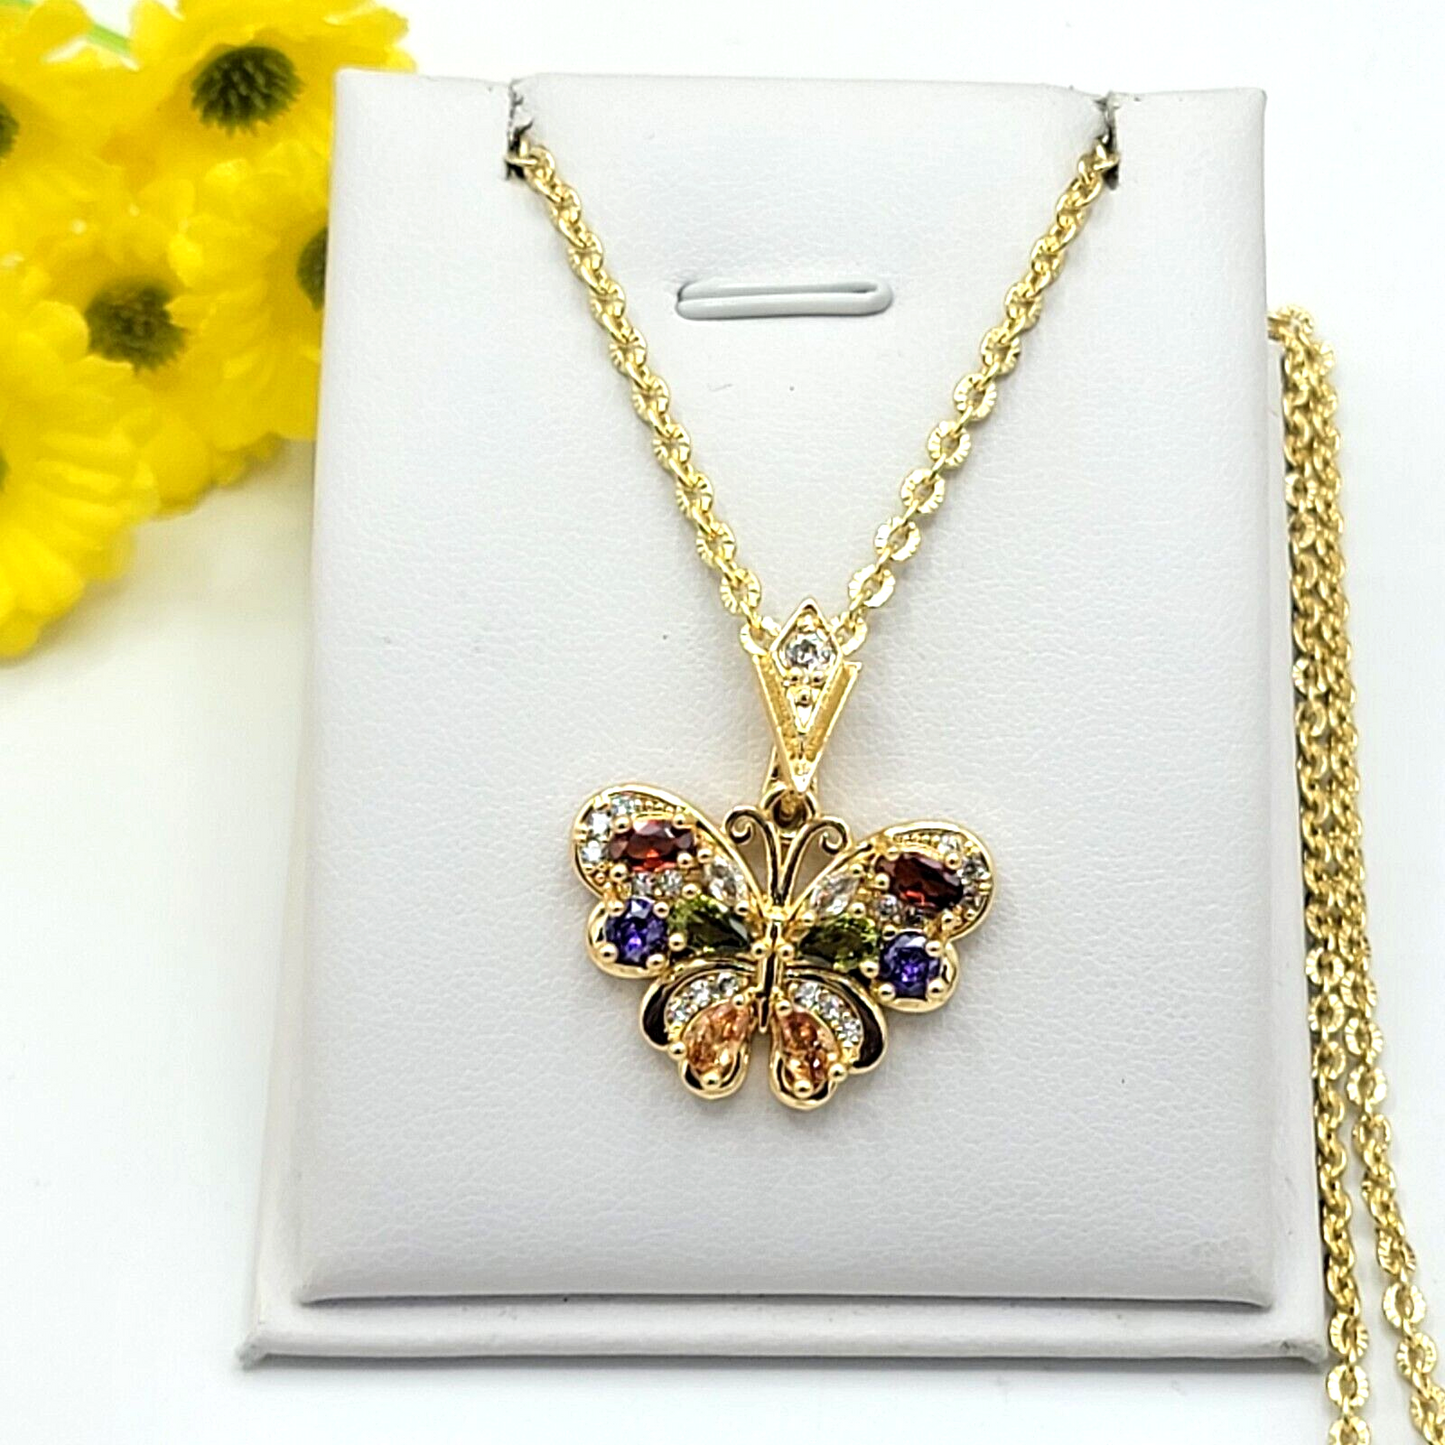 Necklaces - 14K Gold Plated. Multicolor Crystals Butterfly Pendant & Chain.